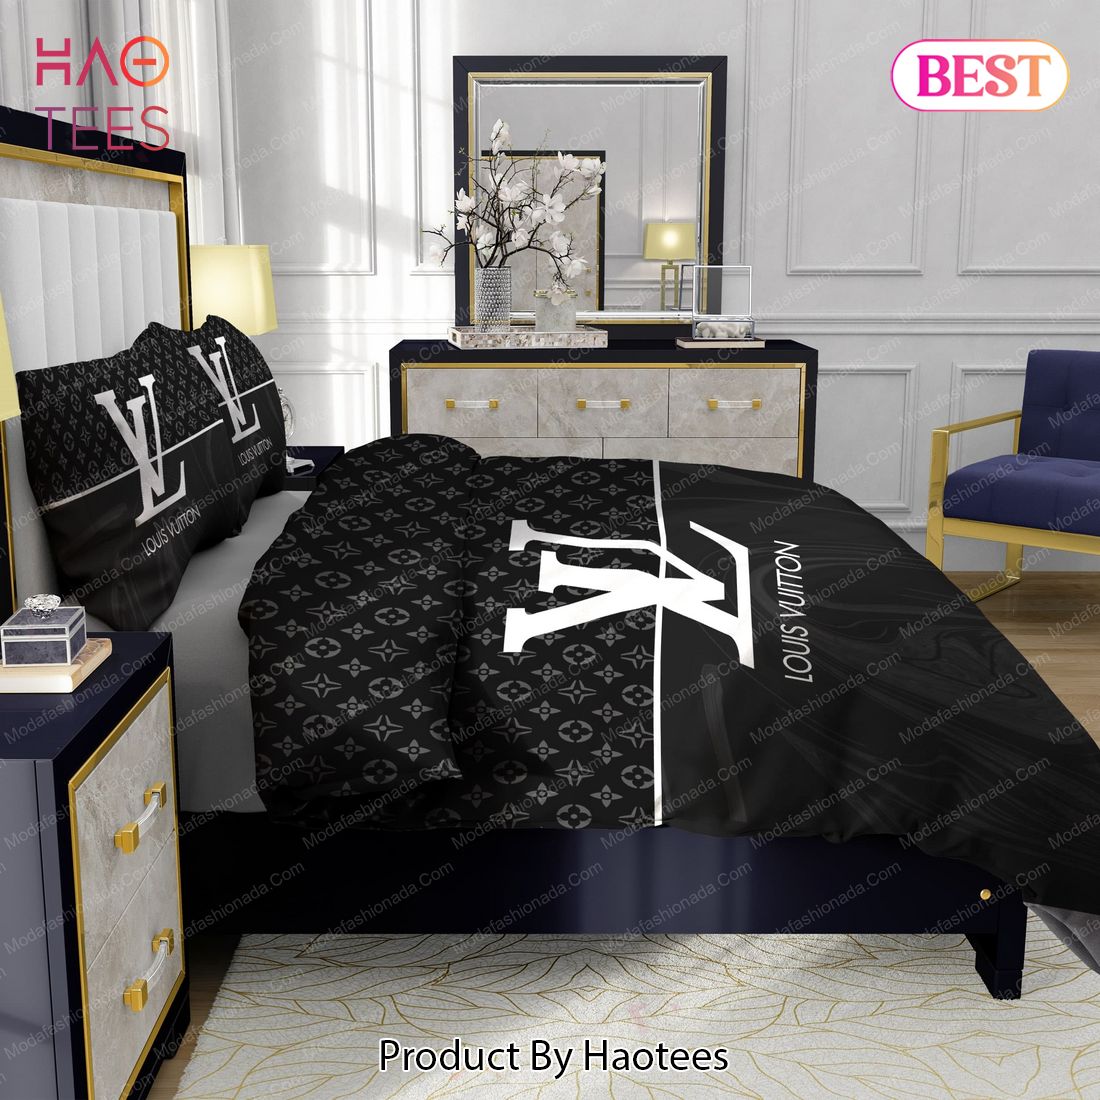 Black And White Veinstone Louis Vuitton Bedding Sets Bed Sets